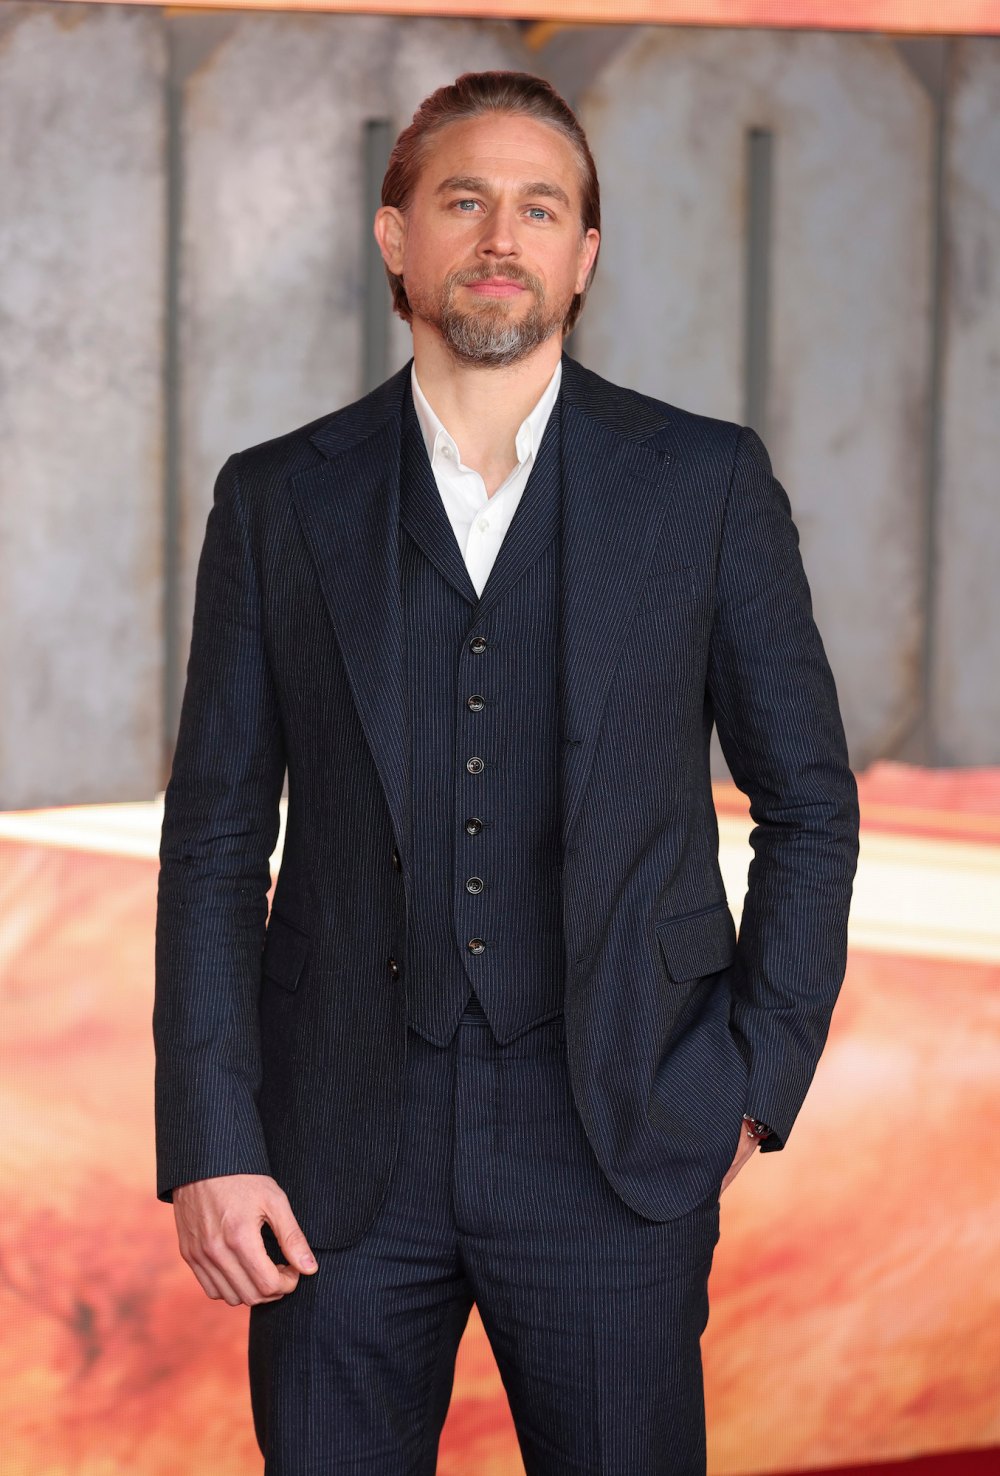 Charlie Hunnam Has 1 Regret About Dropping Out of Fifty Shades Role